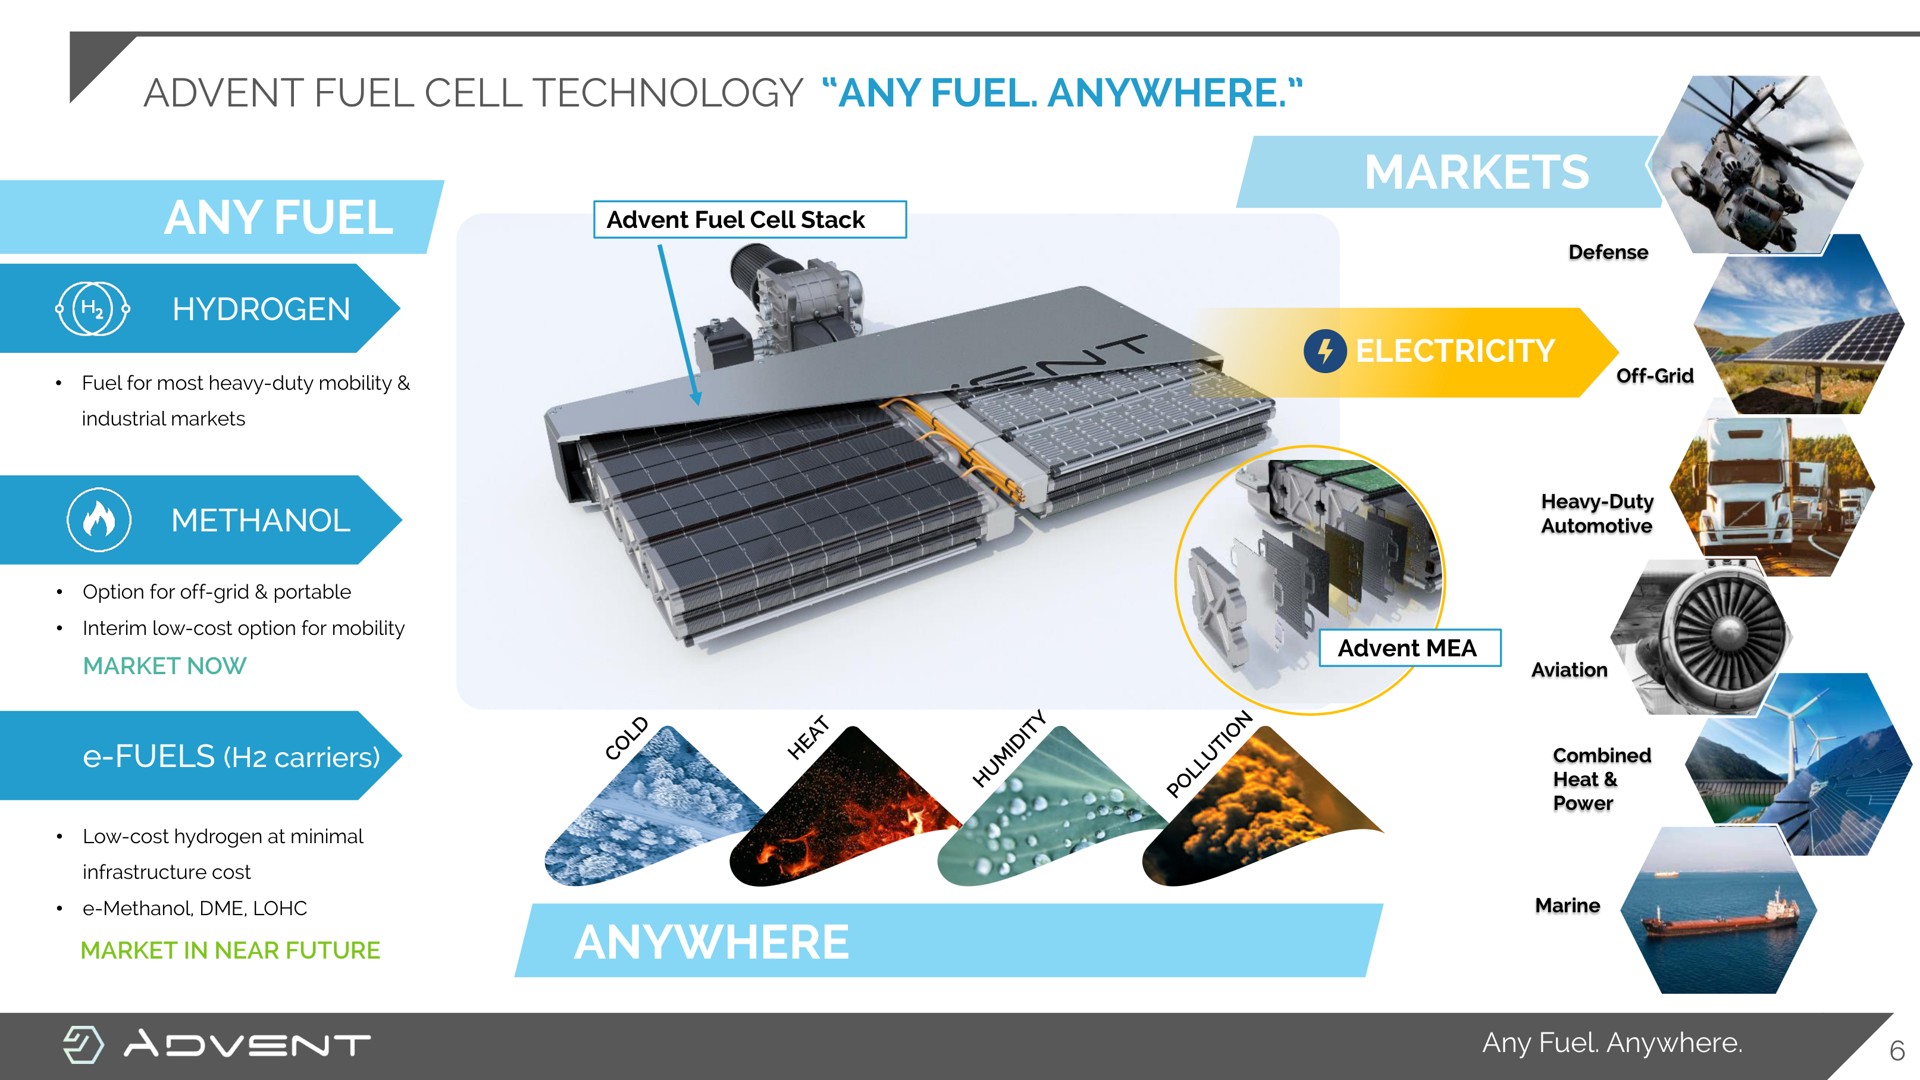 fuel cell technology any fuel anywhere any fuel anywhere markets nae | Advent